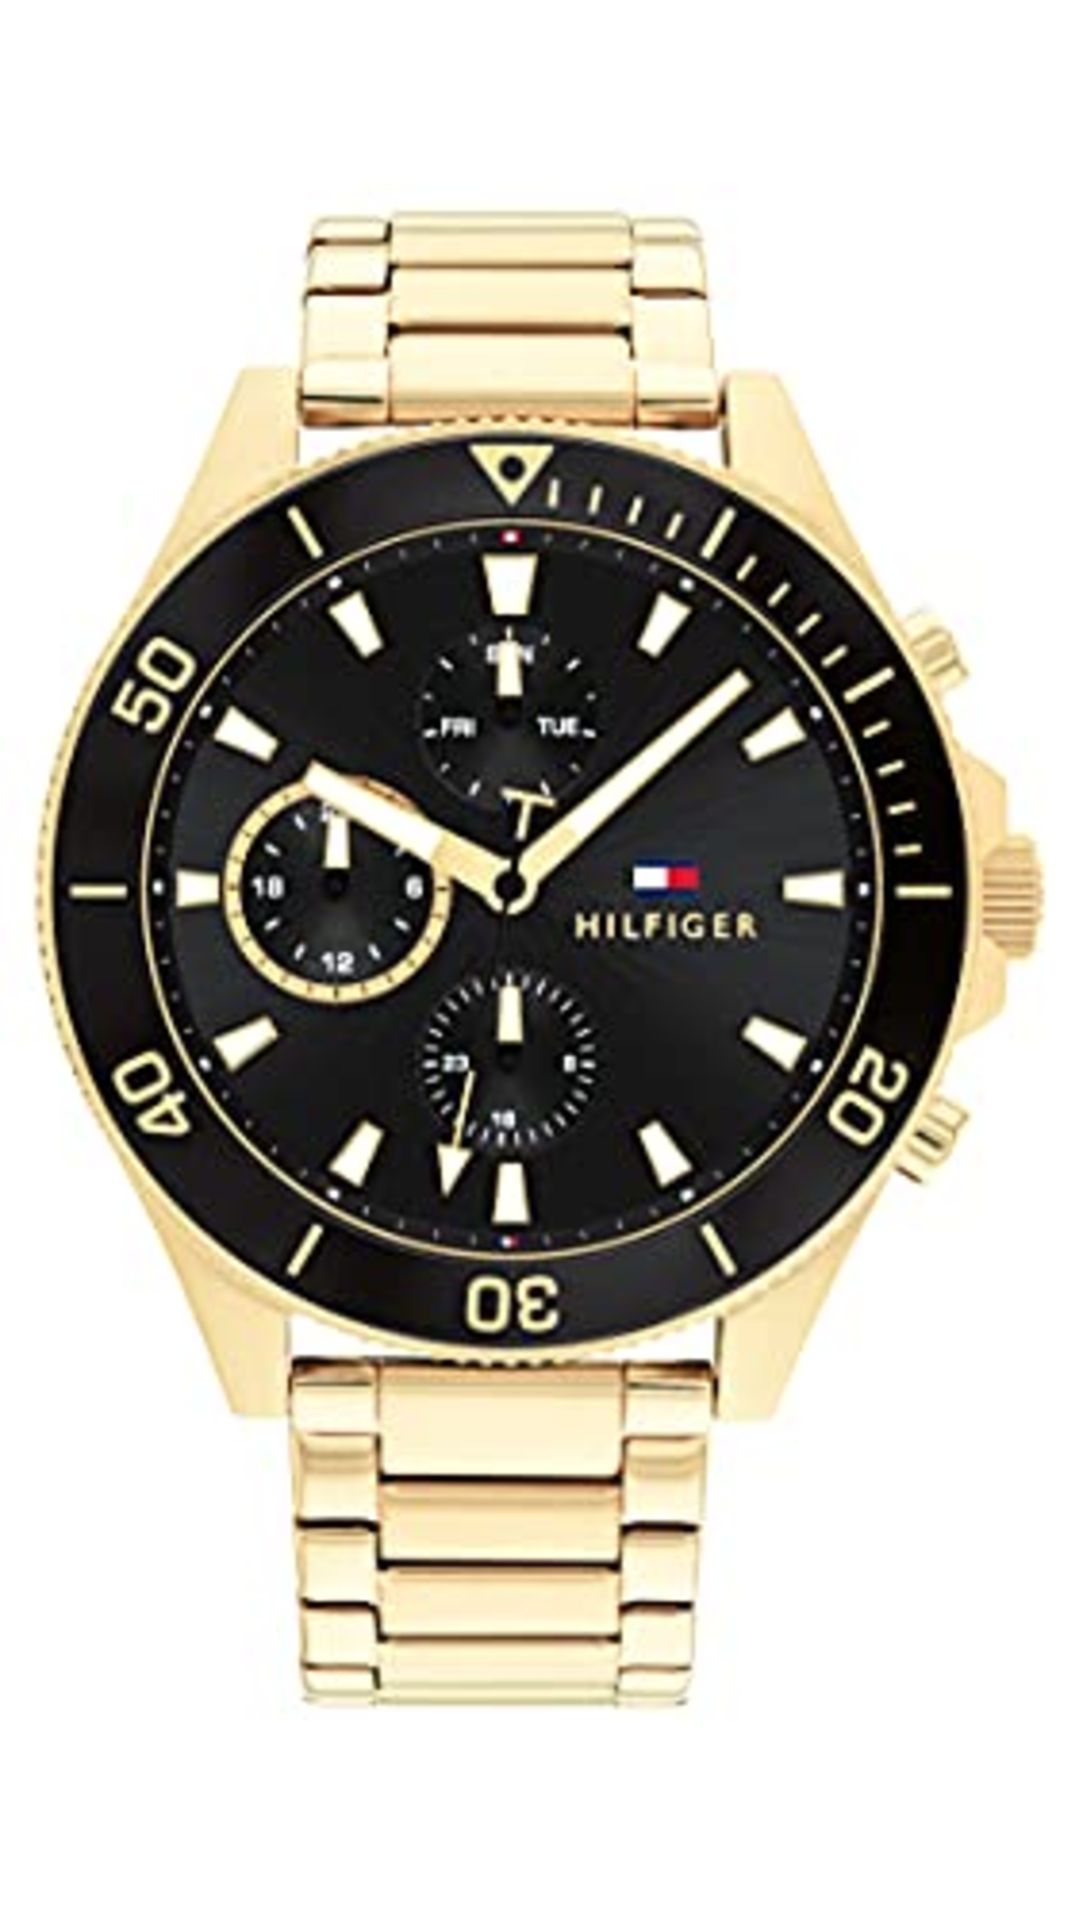 RRP £153.00 Tommy Hilfiger Multi Dial Quartz Watch for Men with Gold-Tone Stainless Steel Bracelet